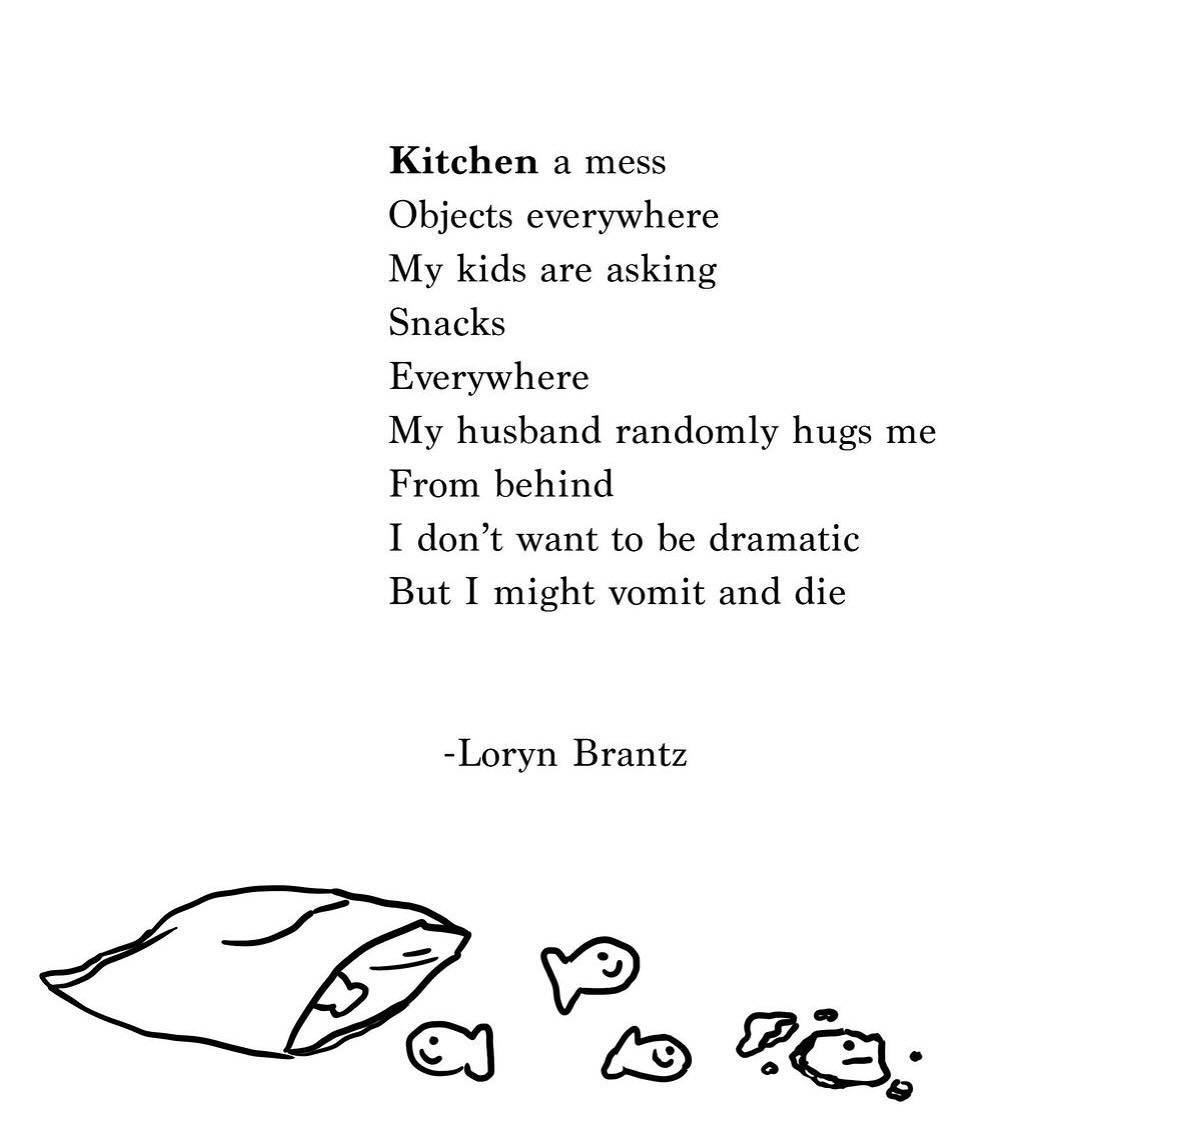 This poem from @lorynbrantz is perfect for our topic this week - touch! 

Touch plays a huge role in our lives as parents, but it can bring up quite a mixed bag of emotions. We may cherish those sweet moments of snuggles, hand holding and kisses. But